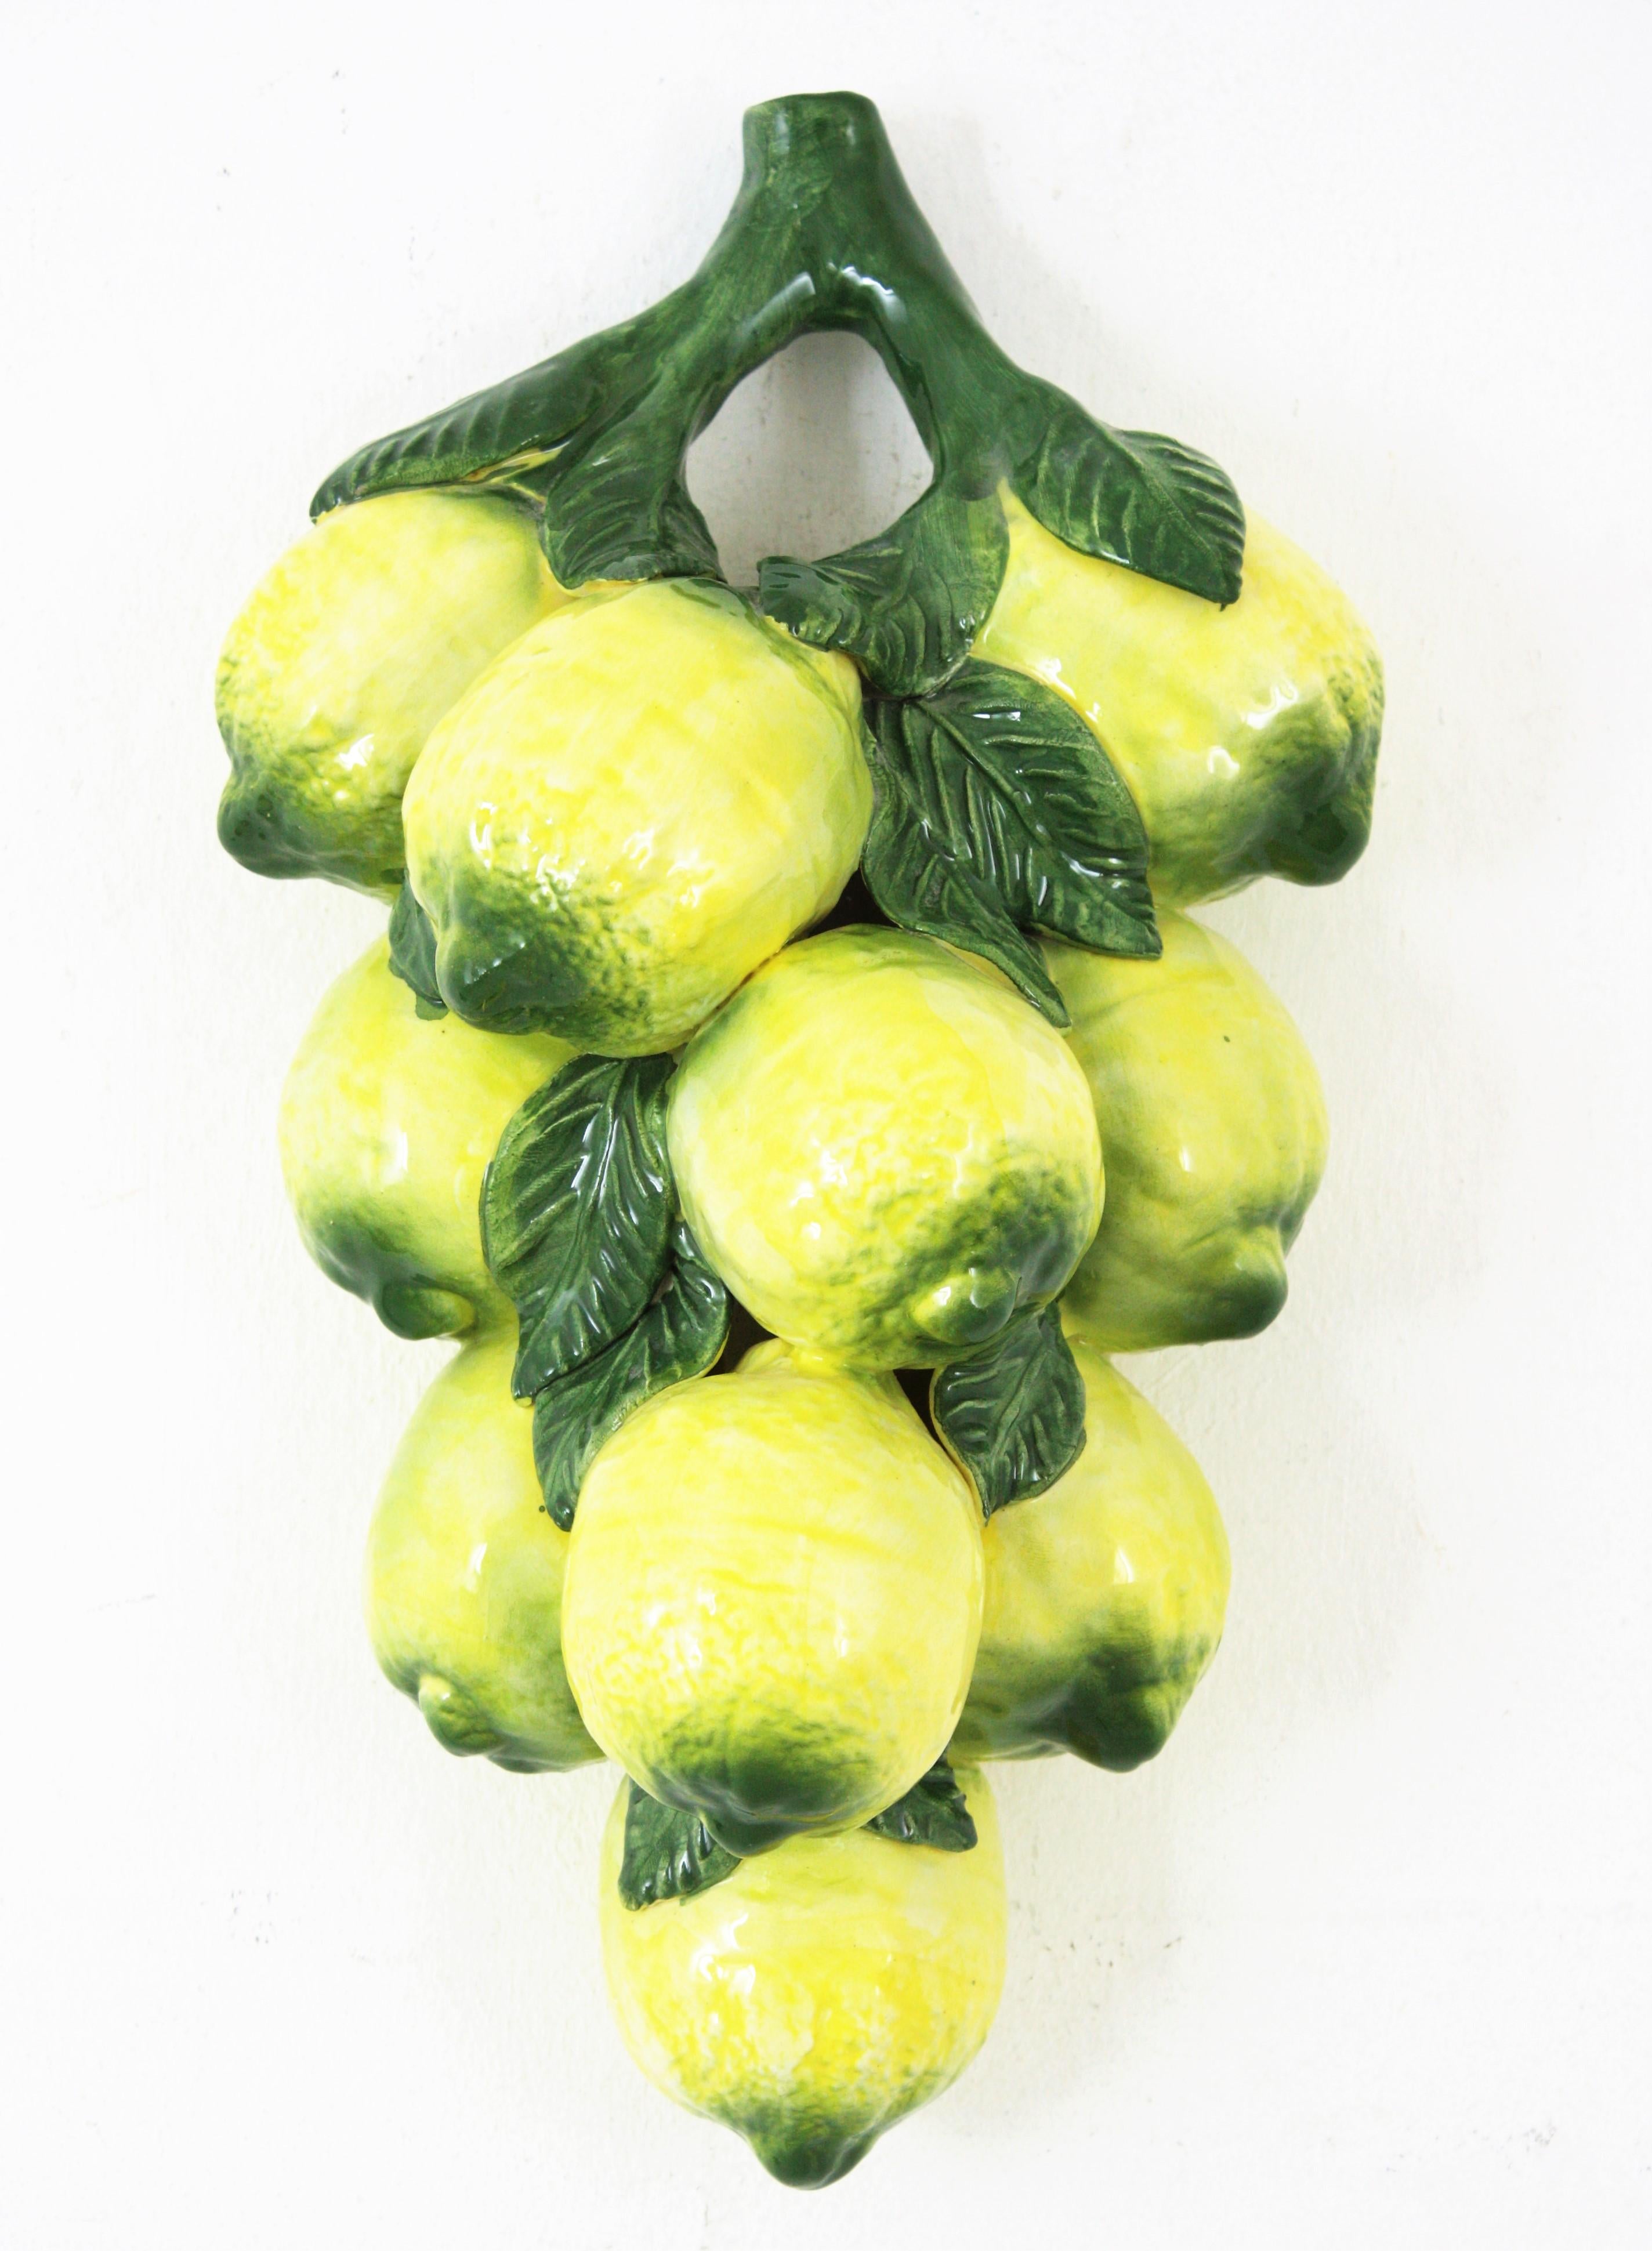 Stunning lemons Manises Majolica ceramic wall decoration, Spain, 1960s.
Handcrafted ceramic wall hanging sculpture featuring a bunch of lemons. Vibrant yellow color with green accents on the leaves.
This colorful wall decoration will add a cool